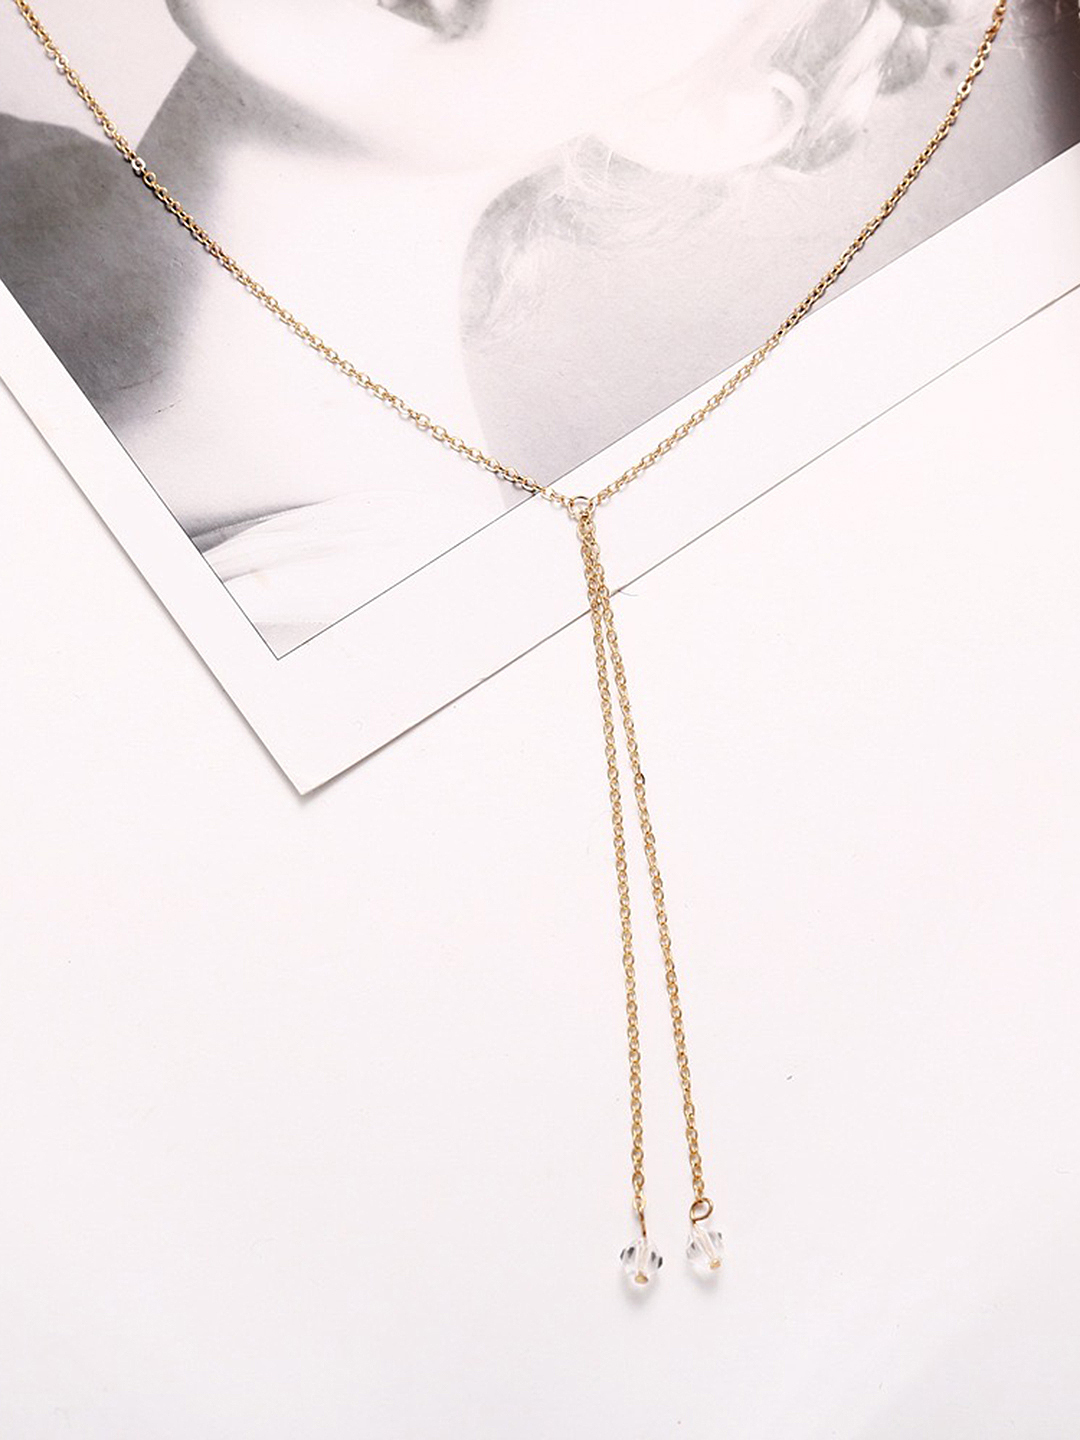 Stunning Gold Plated Pearl and Dripping Pendant Necklace